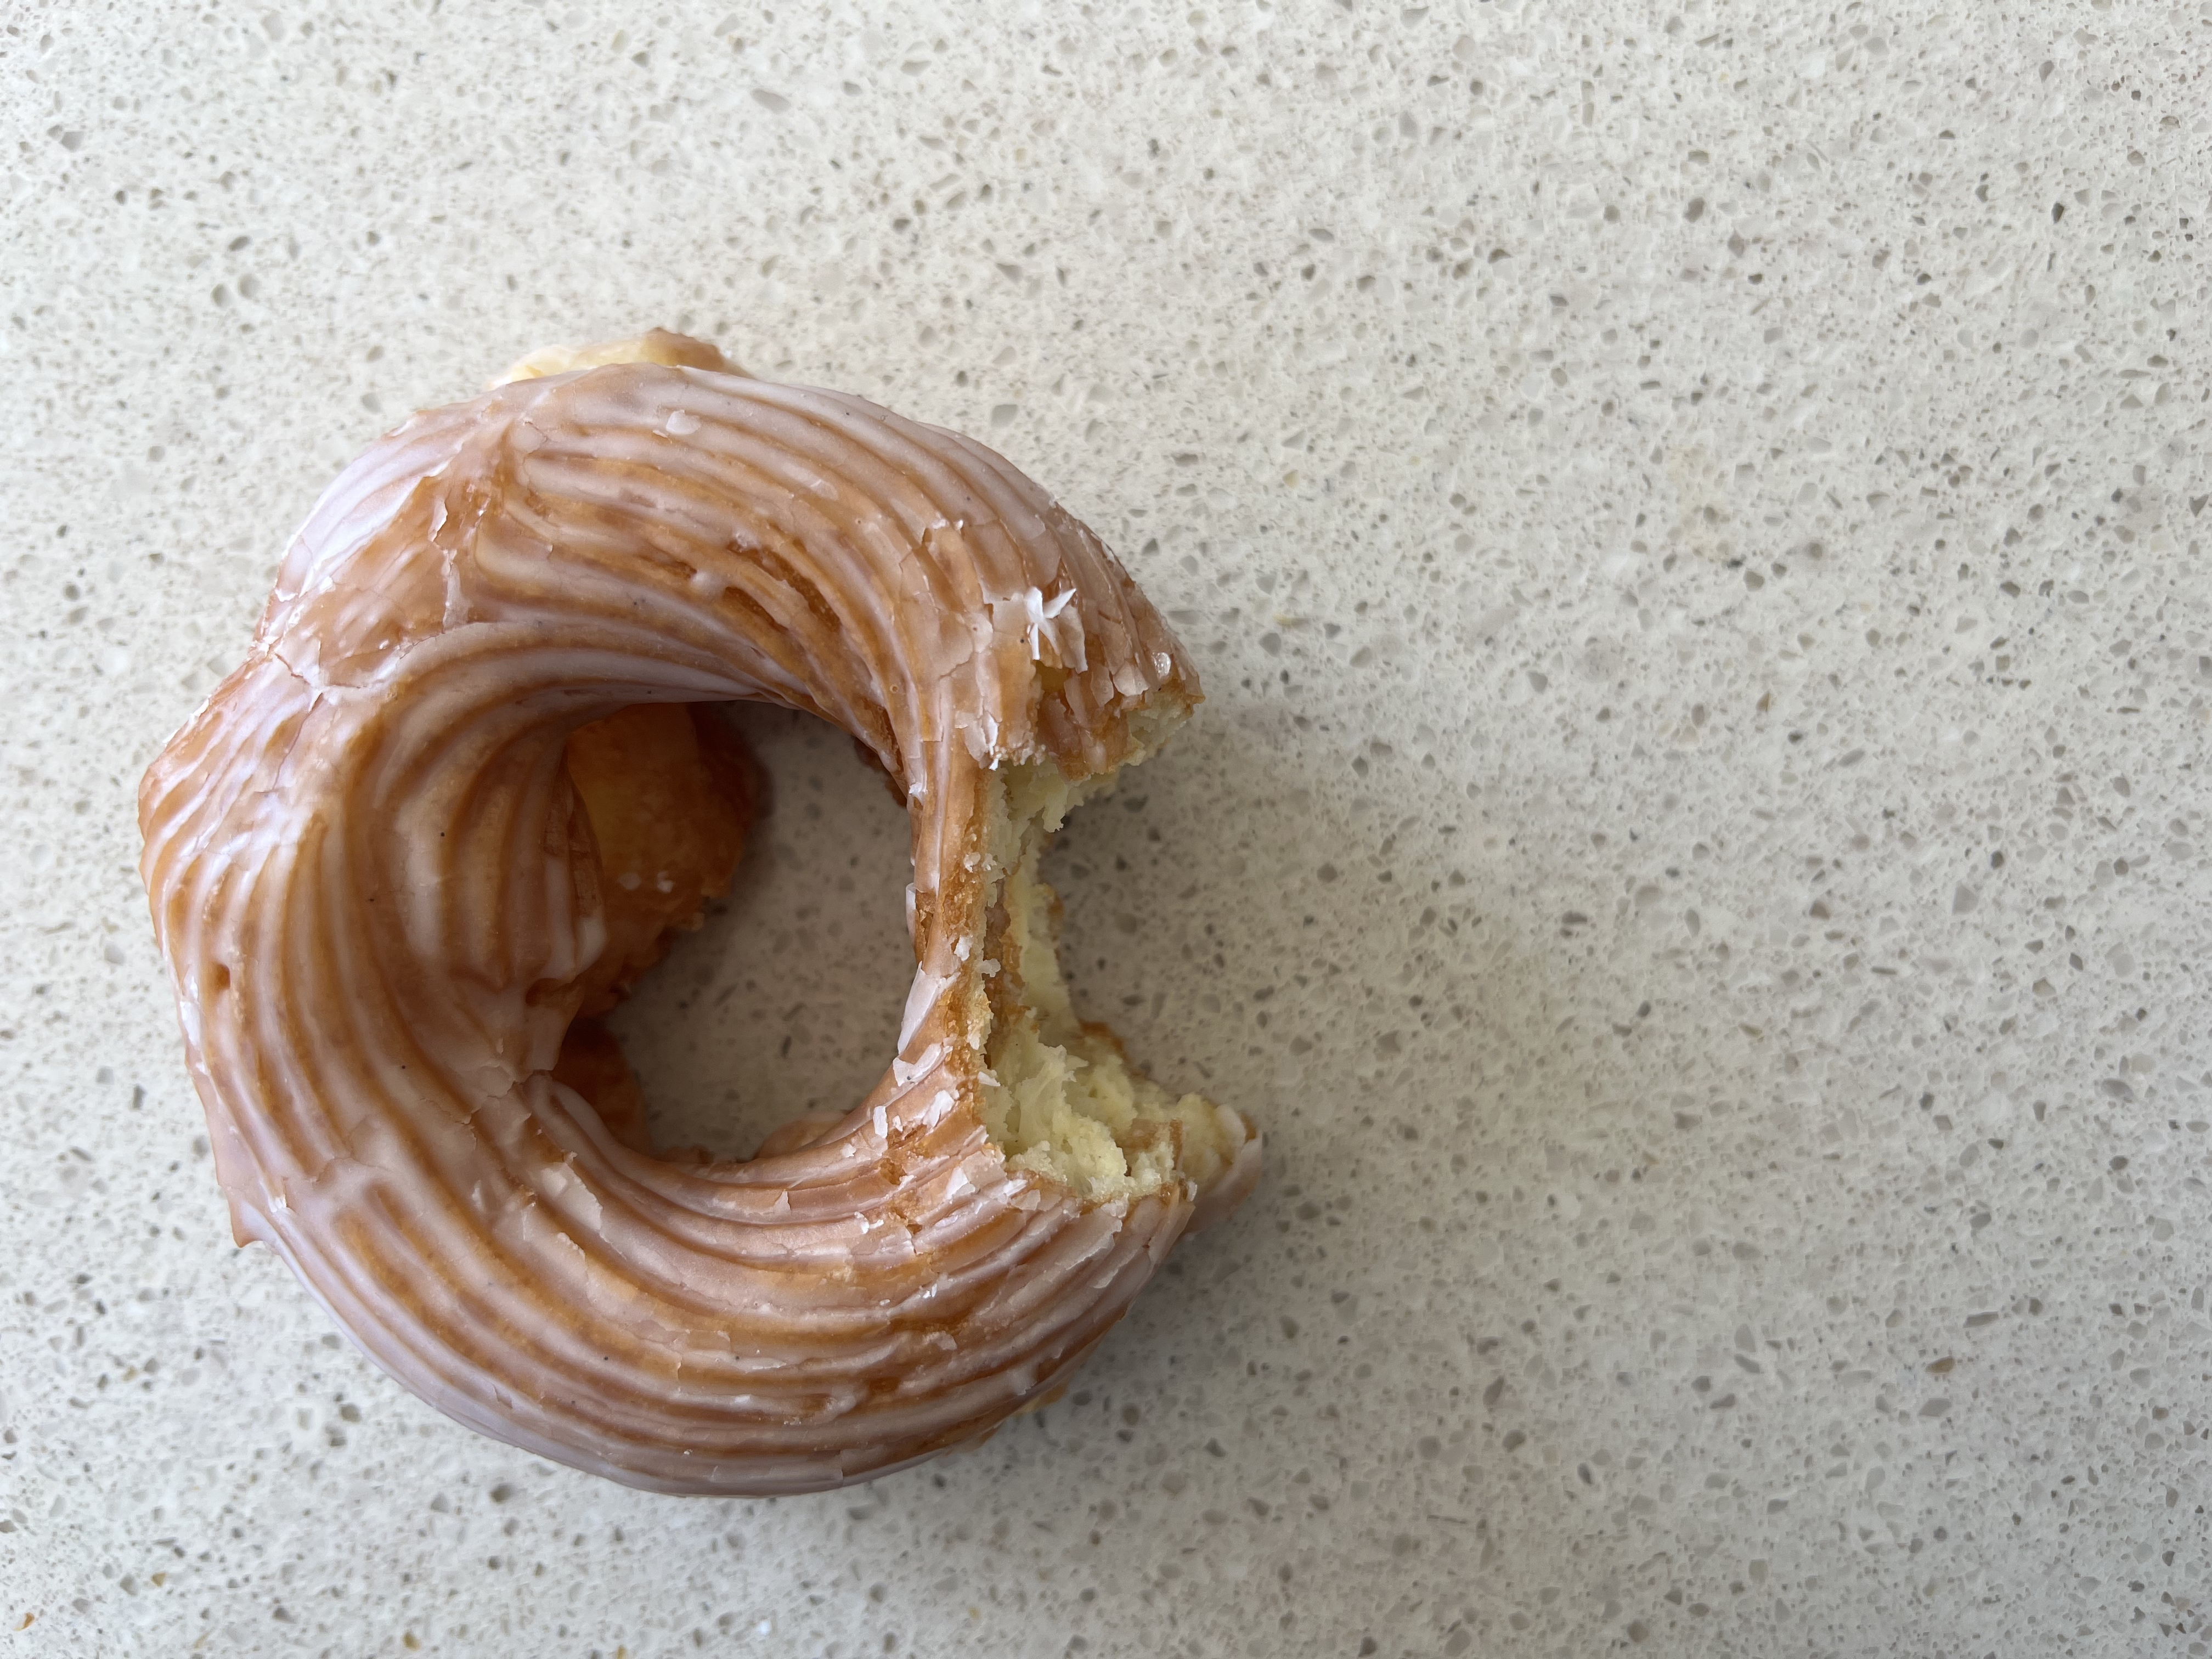 A glazed cruller with a visible bite mark sits above a marble countertop